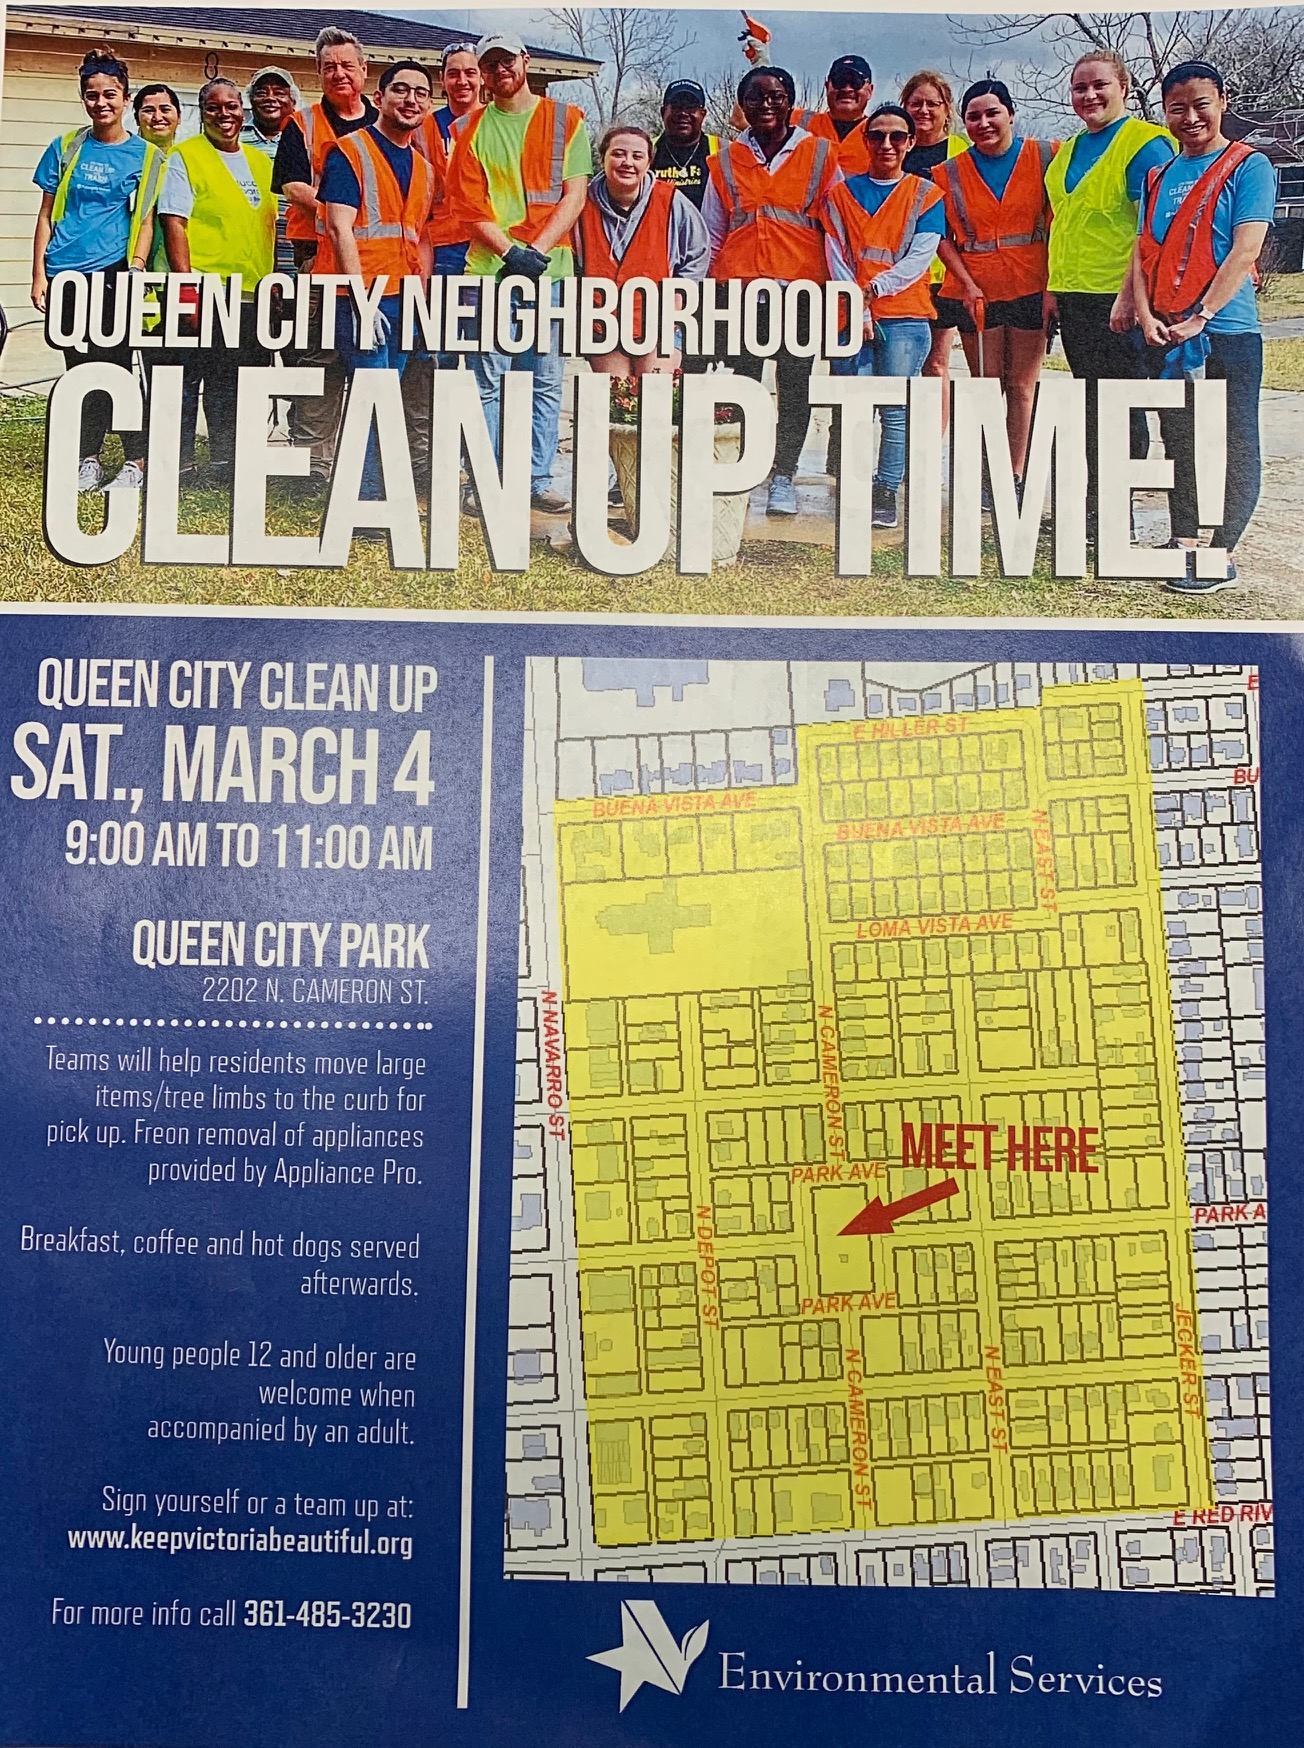 Join us Saturday March 4, 2023 to help clean up Queen City!